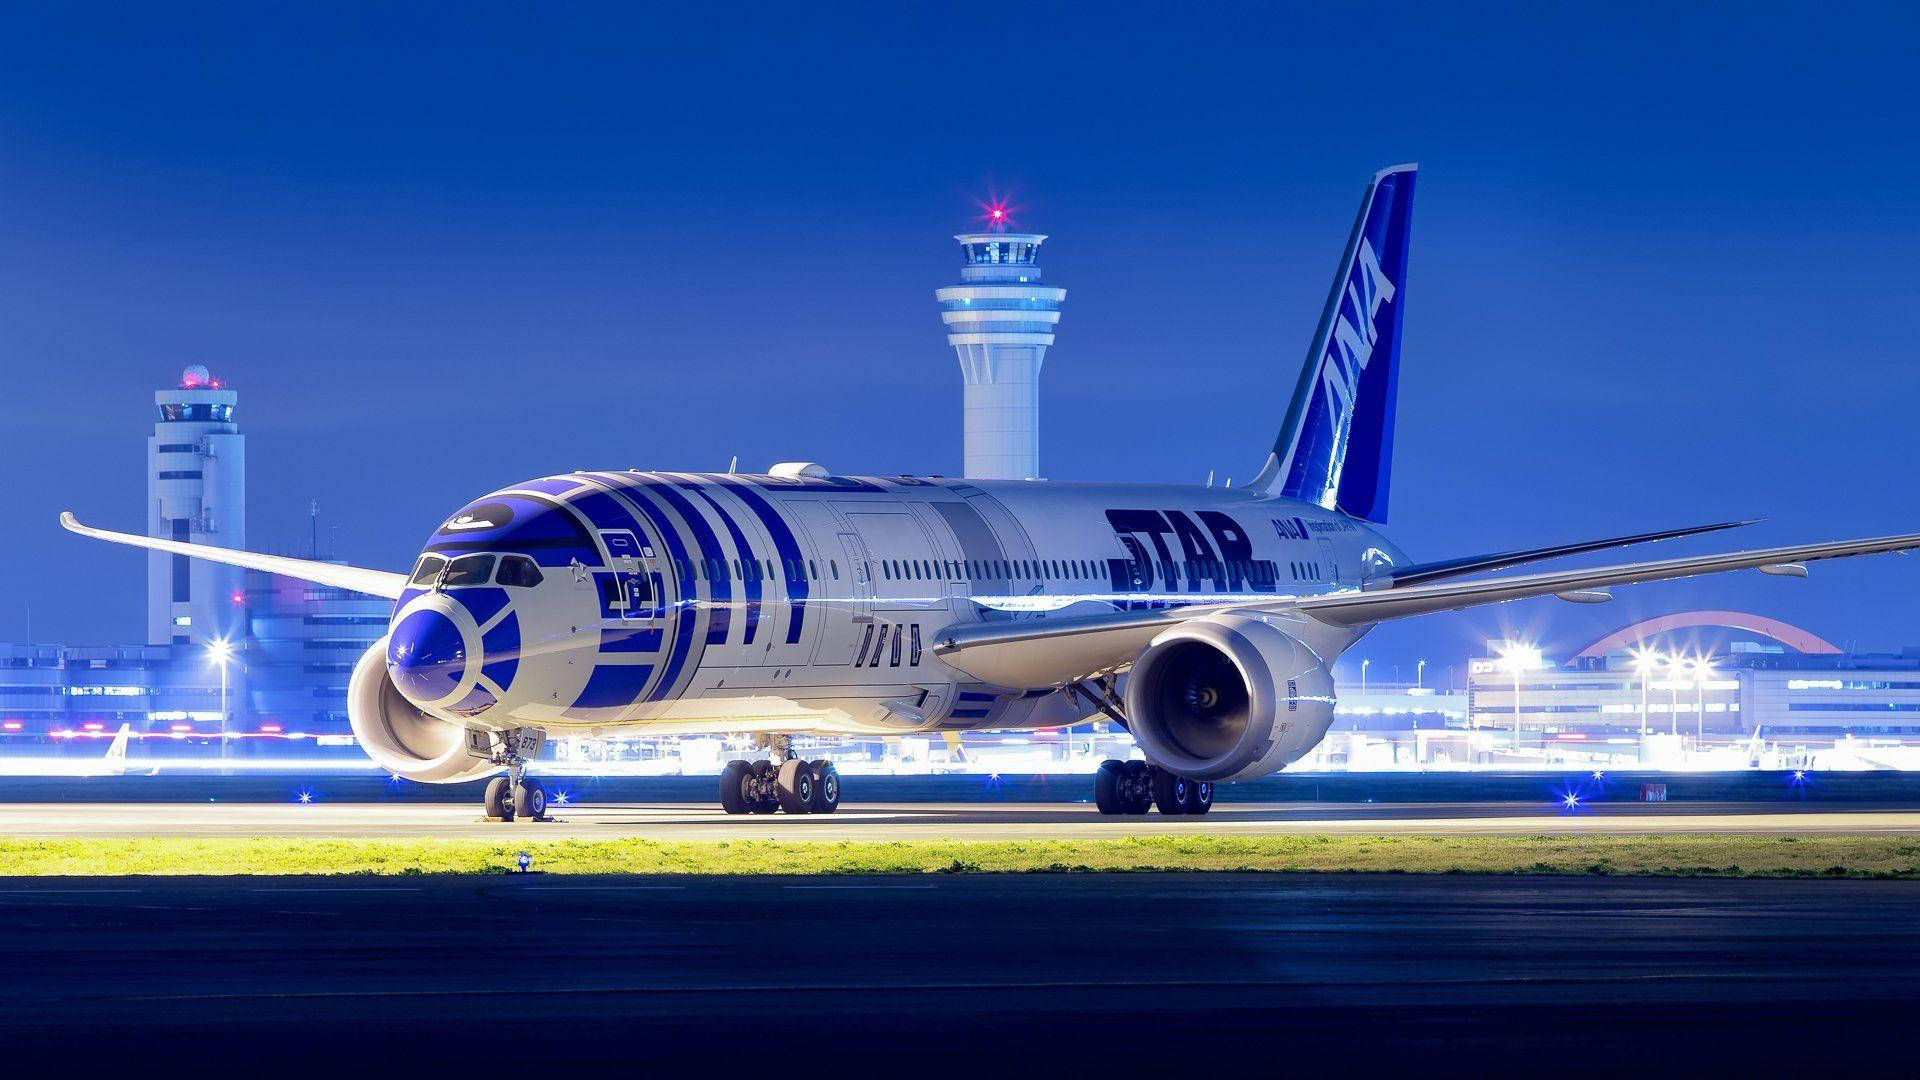 Magnificent ANA Airplane At Night Wallpaper